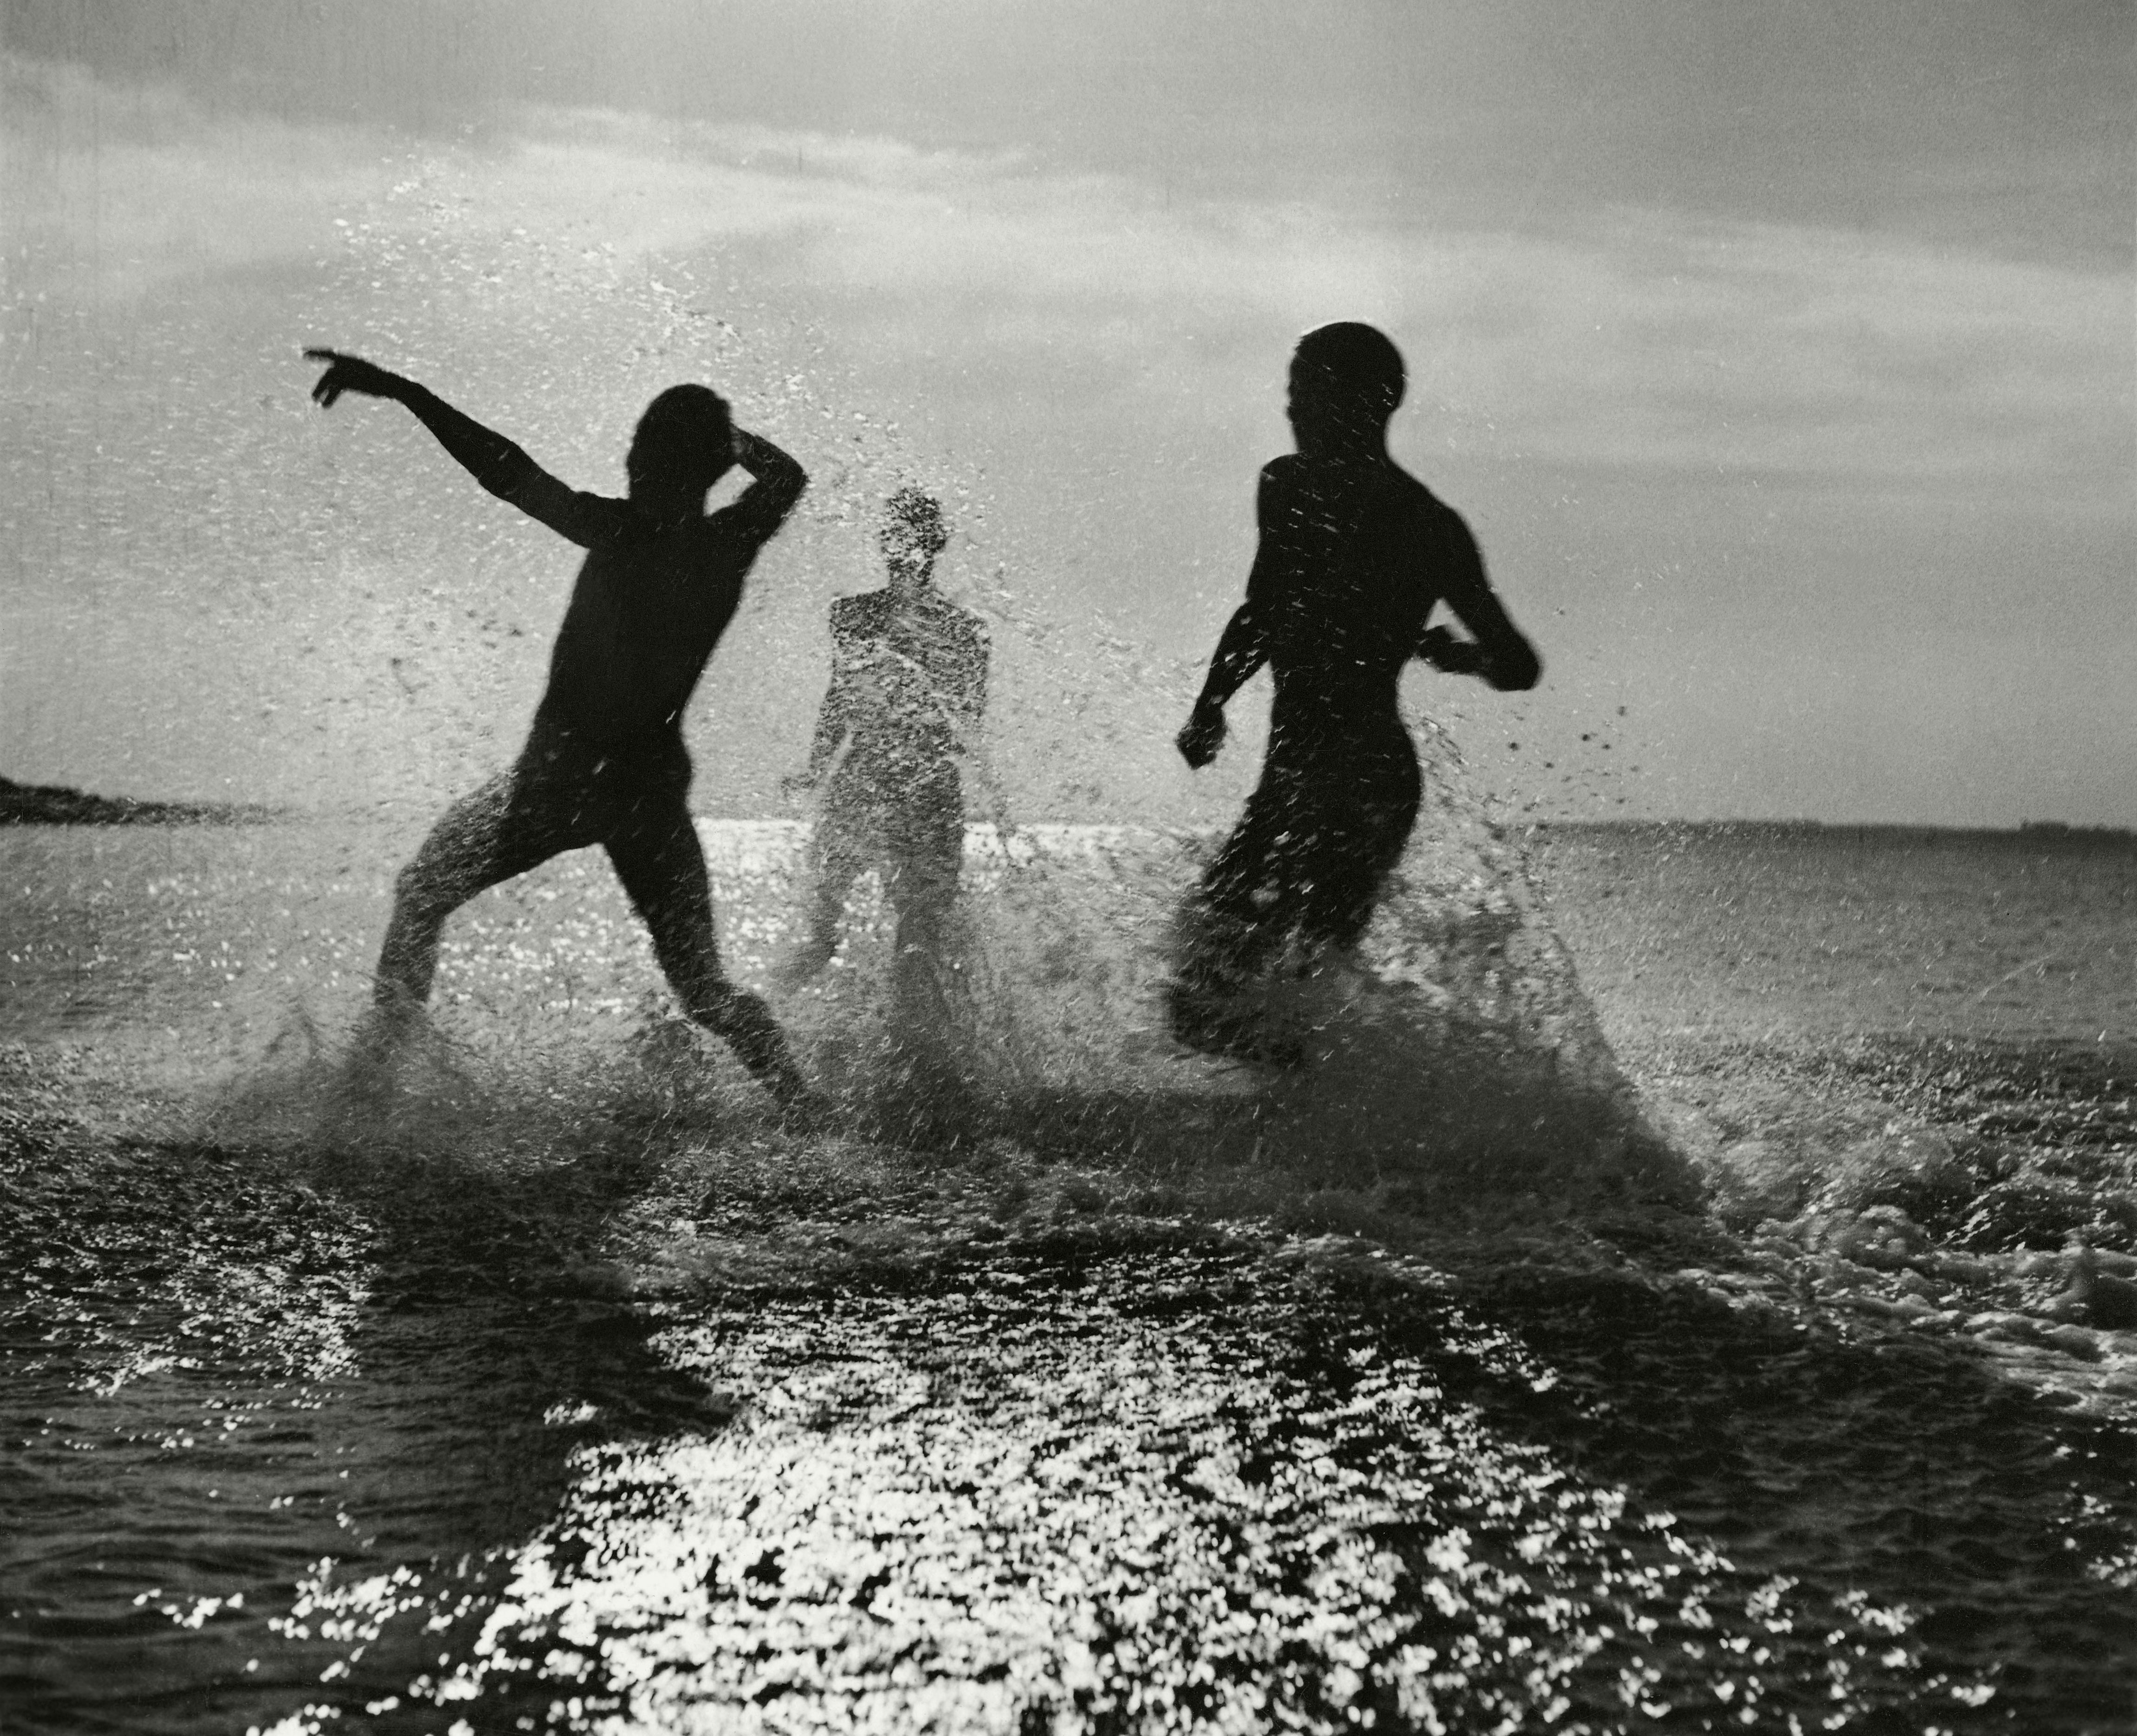 Water games at North Sea by Herbert List 1934